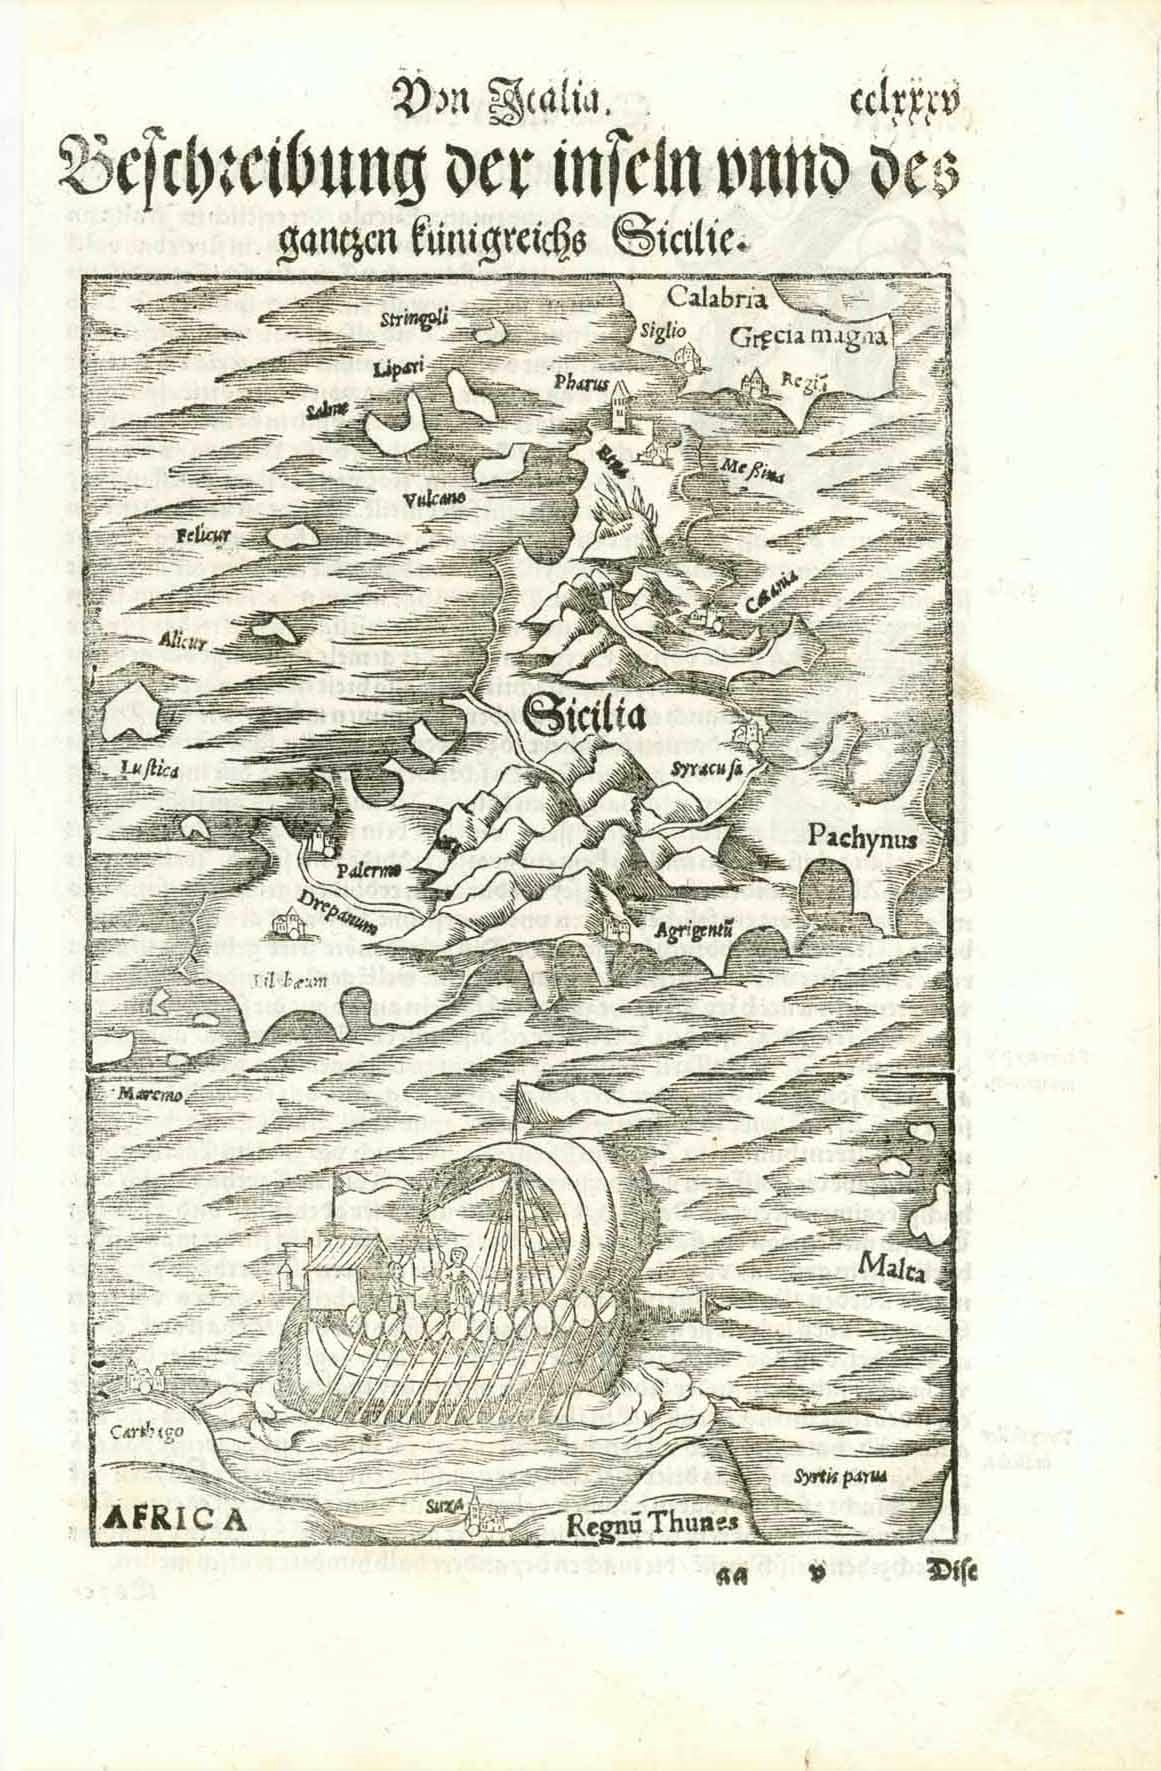 Sicily. - "Von Italia Beschreibung der inseln unnd des gantzen kuenigreichs Sicilie"  The island of Sicily and surrounding islands. The south tip of Calabria and the north tip of Africa.  Woodcut. Published in "Cosmographia" by Sebastian Muenster (1488-1552) German edition.  Basel, 1553  Original antique print   For a 30% discount enter MAPS30 at chekout interior design, wall decoration, ideas, idea, gift ideas, present, vintage, charming, special, decoration, home interior, living room design